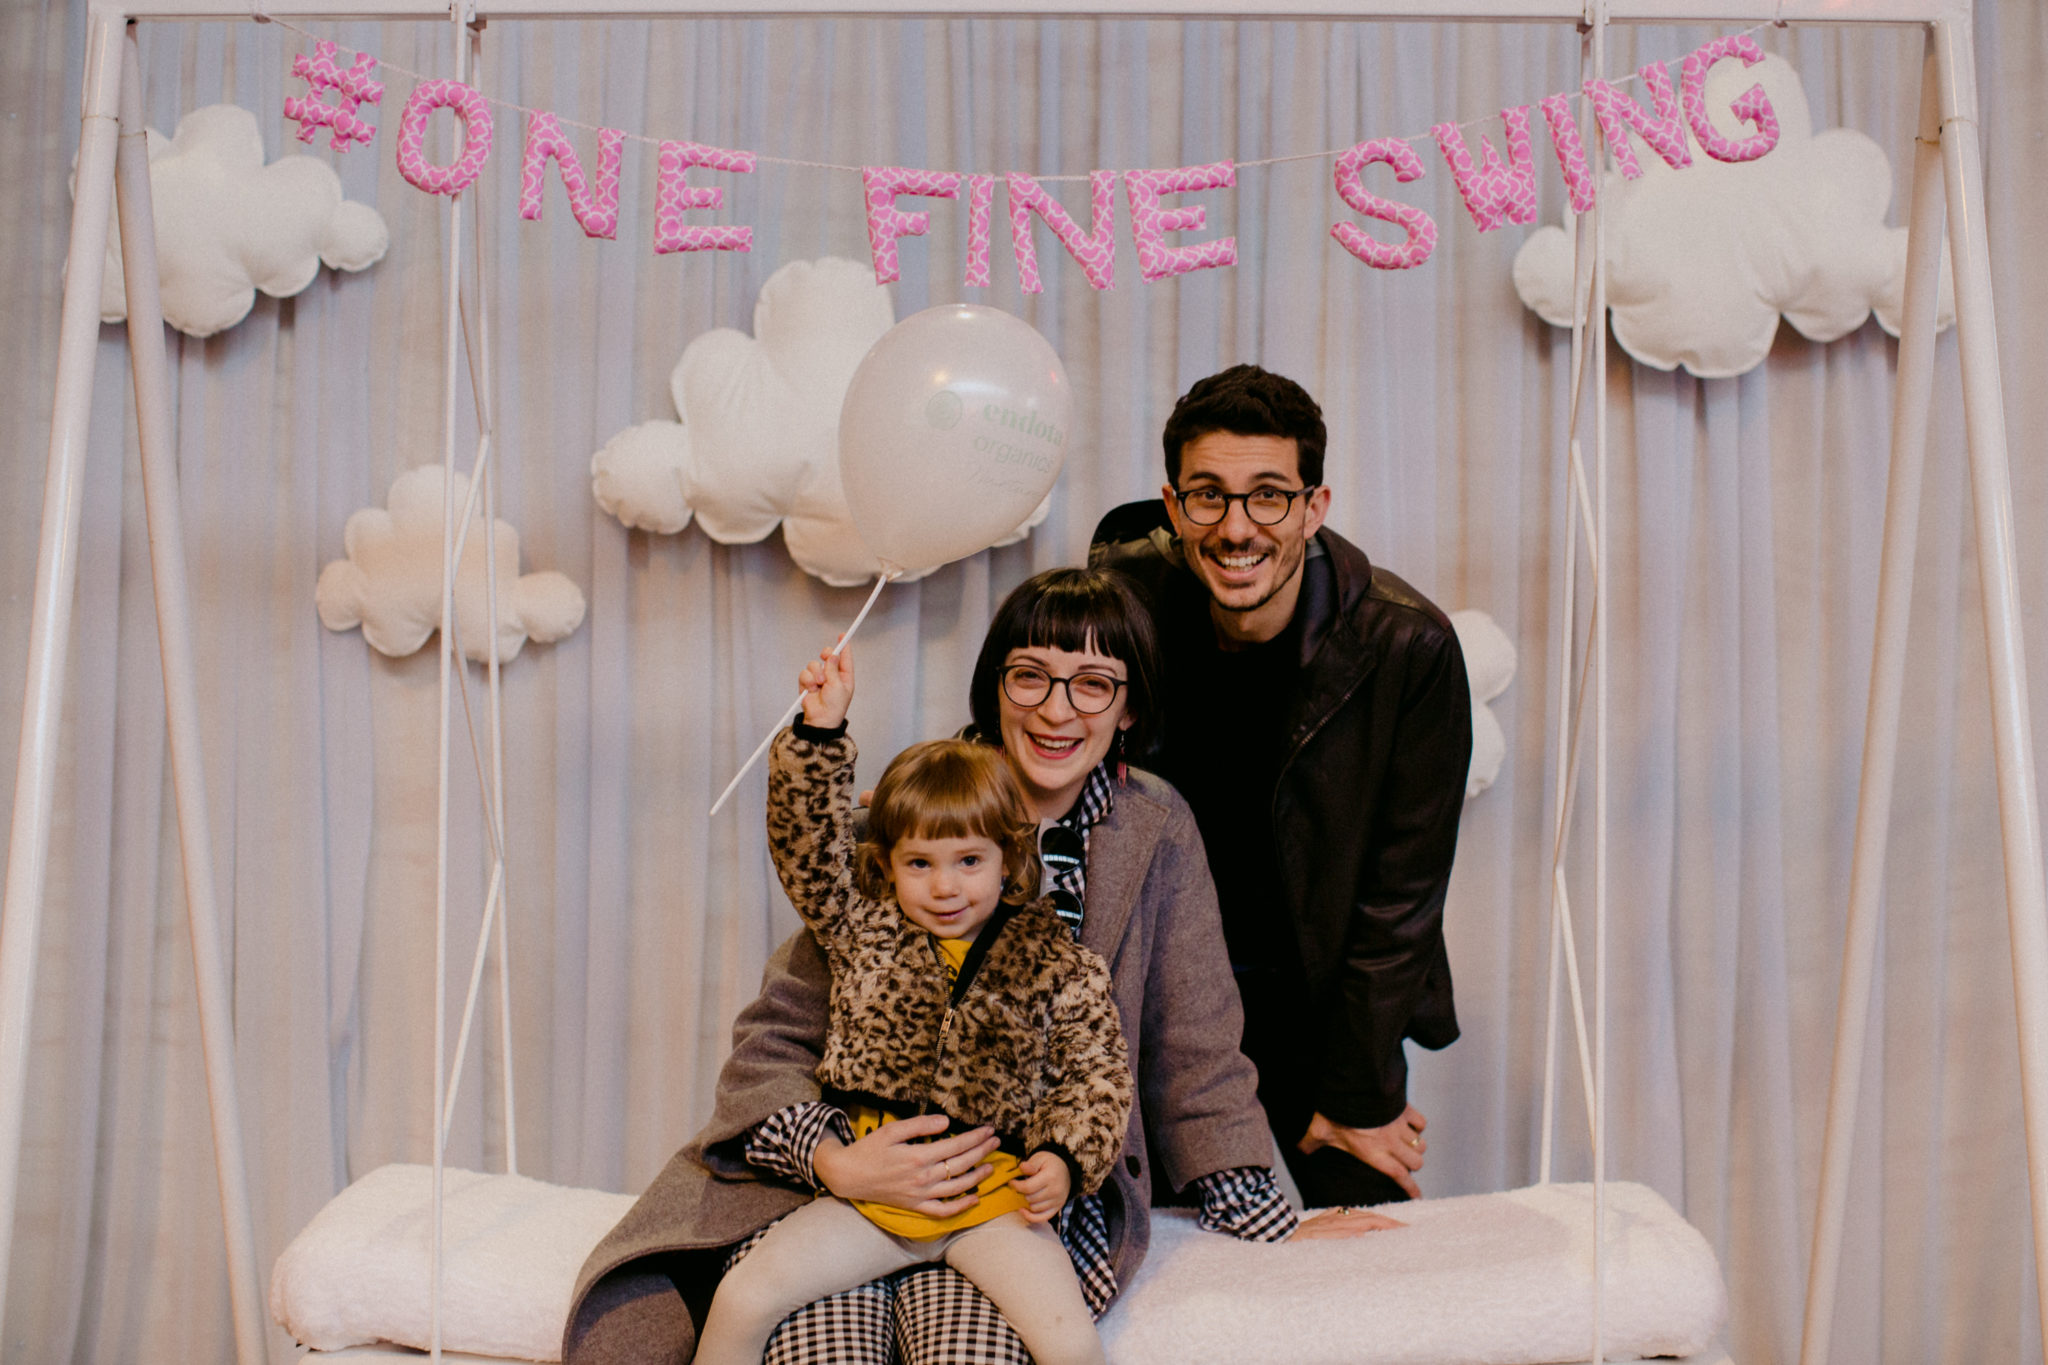 Exhibition attendees posing on the One Fine Swing